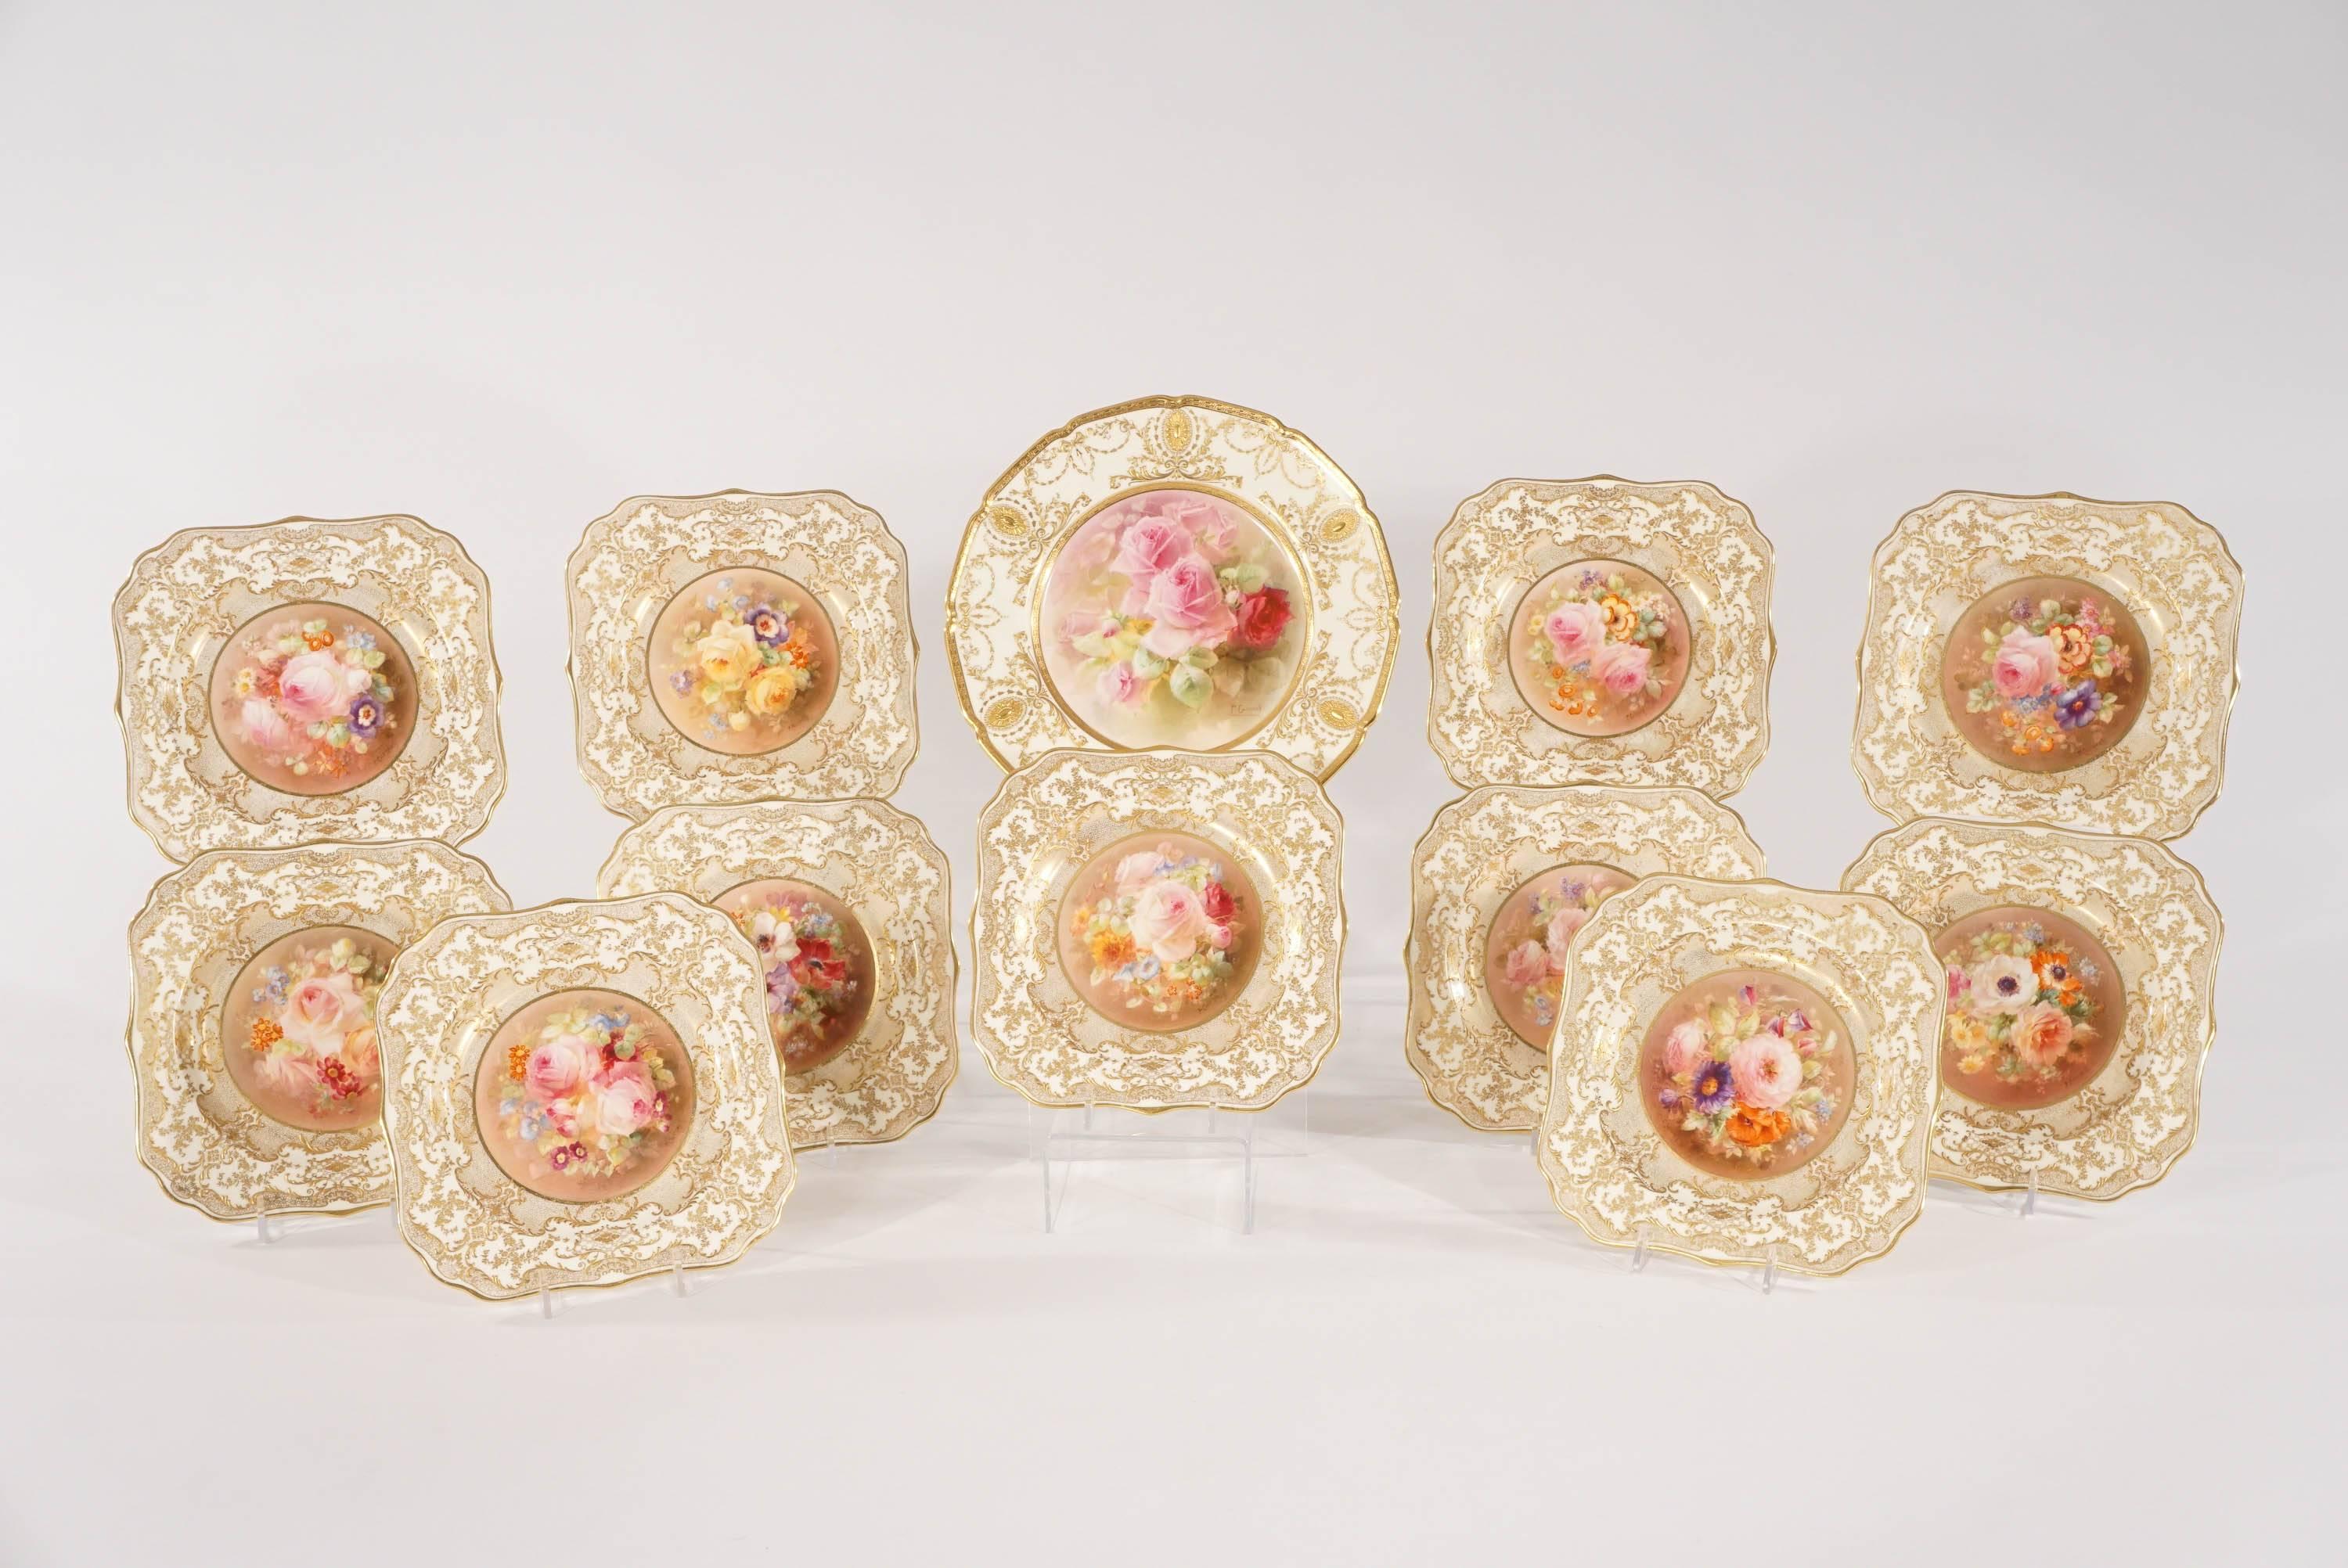 Porcelain 12 Royal Doulton Hand Painted Square Dessert Plates, Signed Curnock, Raised Gold